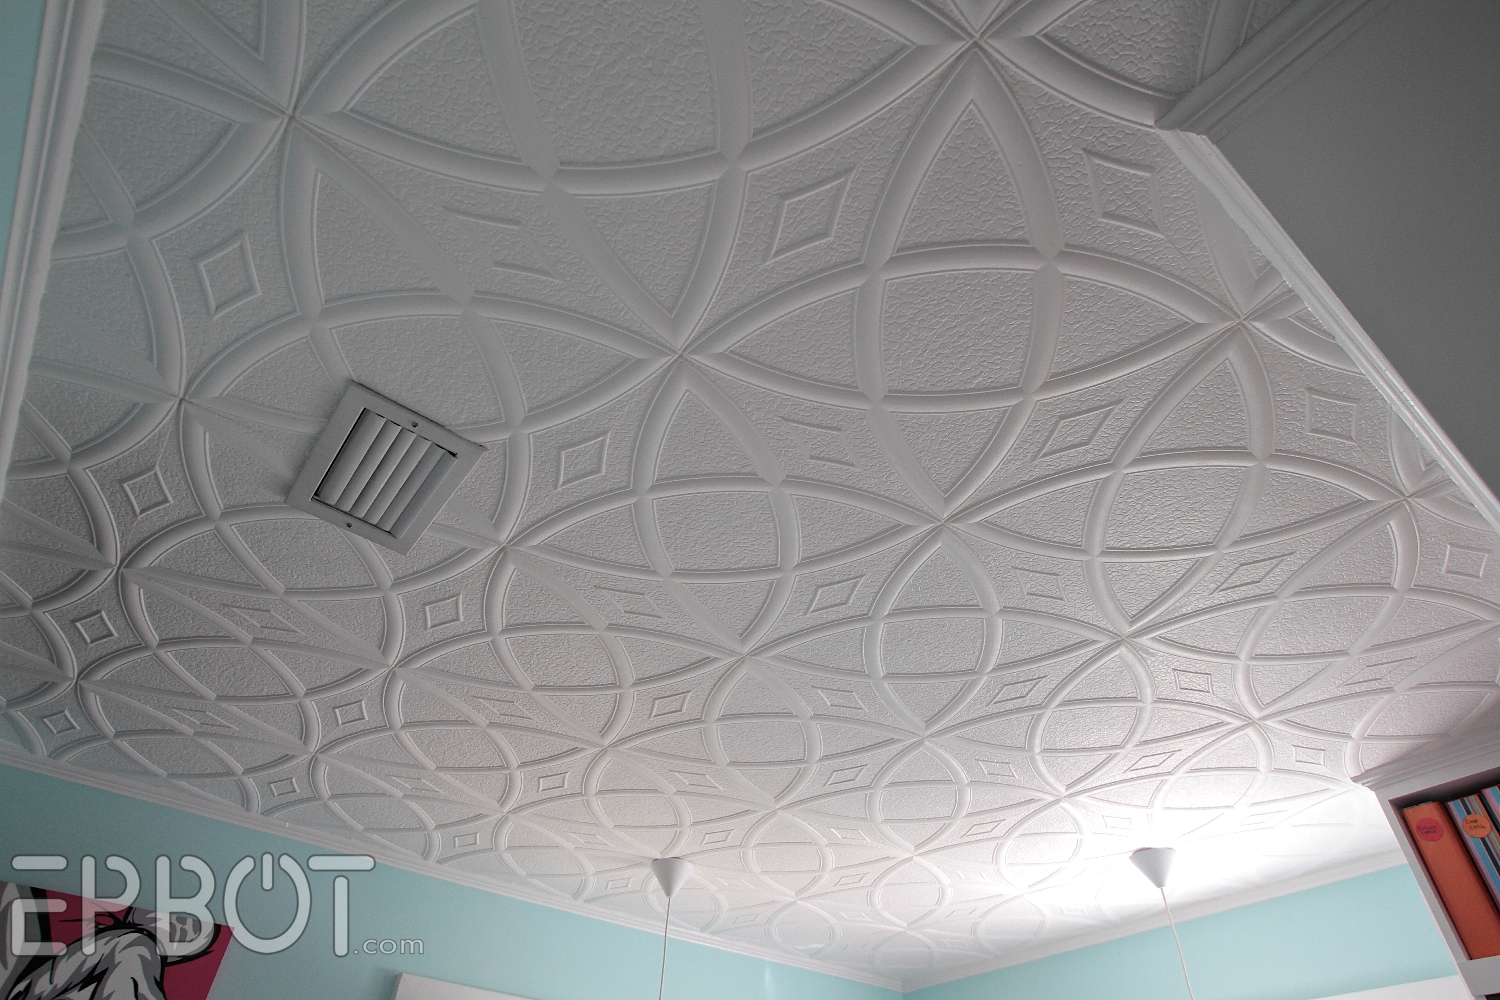 Cover Polystyrene Ceiling Tiles Cover Polystyrene Ceiling Tiles epbot diy faux tin tile ceiling 1500 X 1000